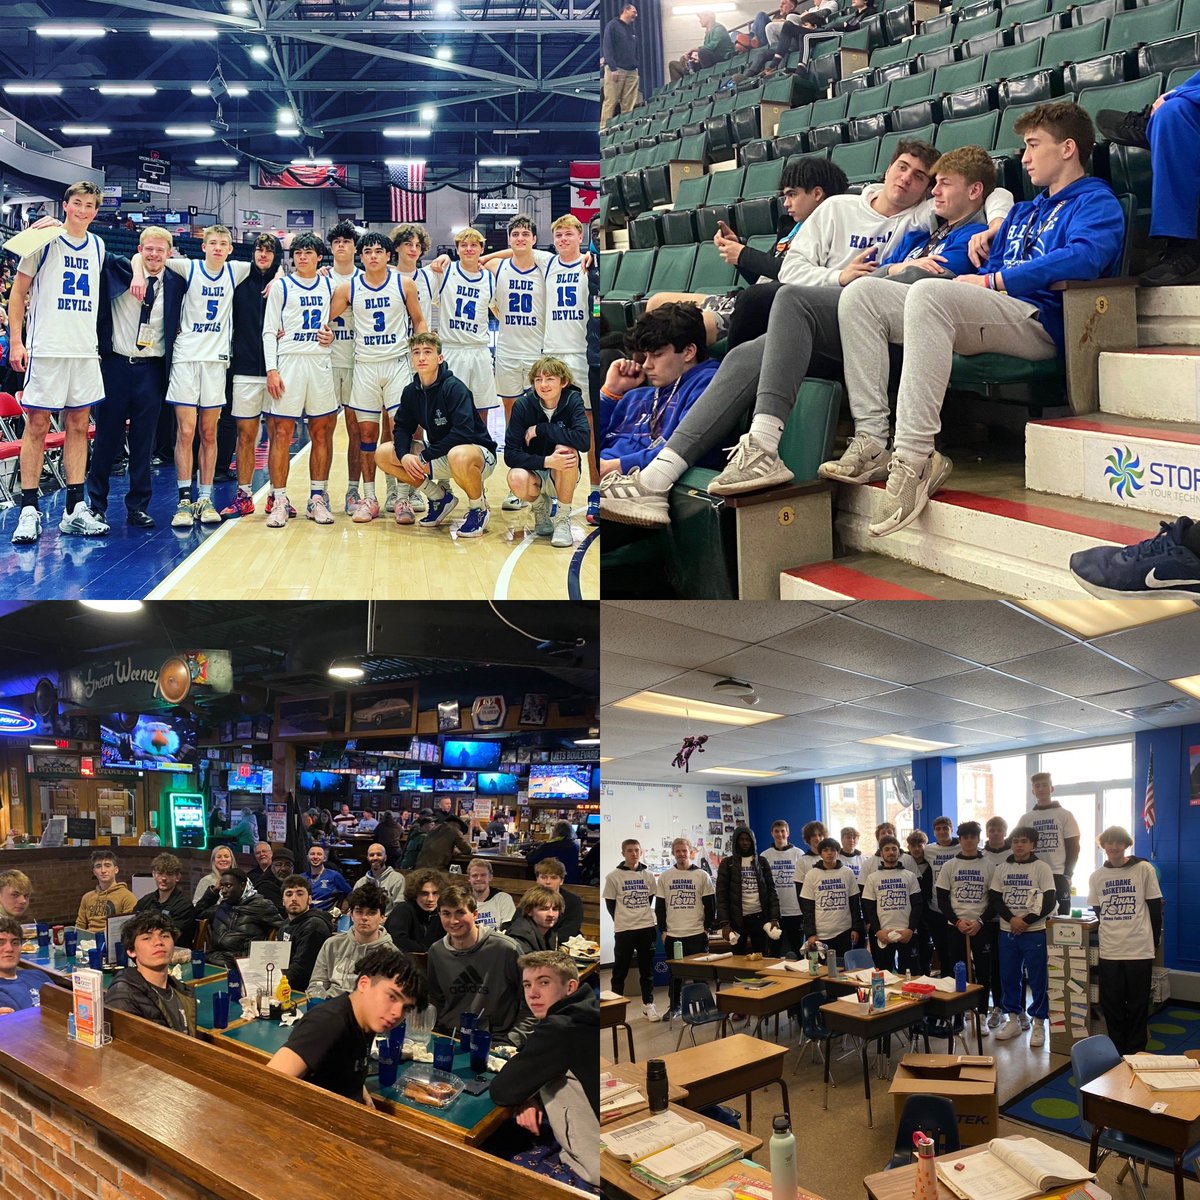 NYSPHSAA Class C State Finalist, finishing 21-5. Beyond proud of this family. It was a magical season full of excitement who played for each other and their resilience and chemistry was one of a kind. We fought til the final buzzer sounded, which is the Haldane way. #oneunit